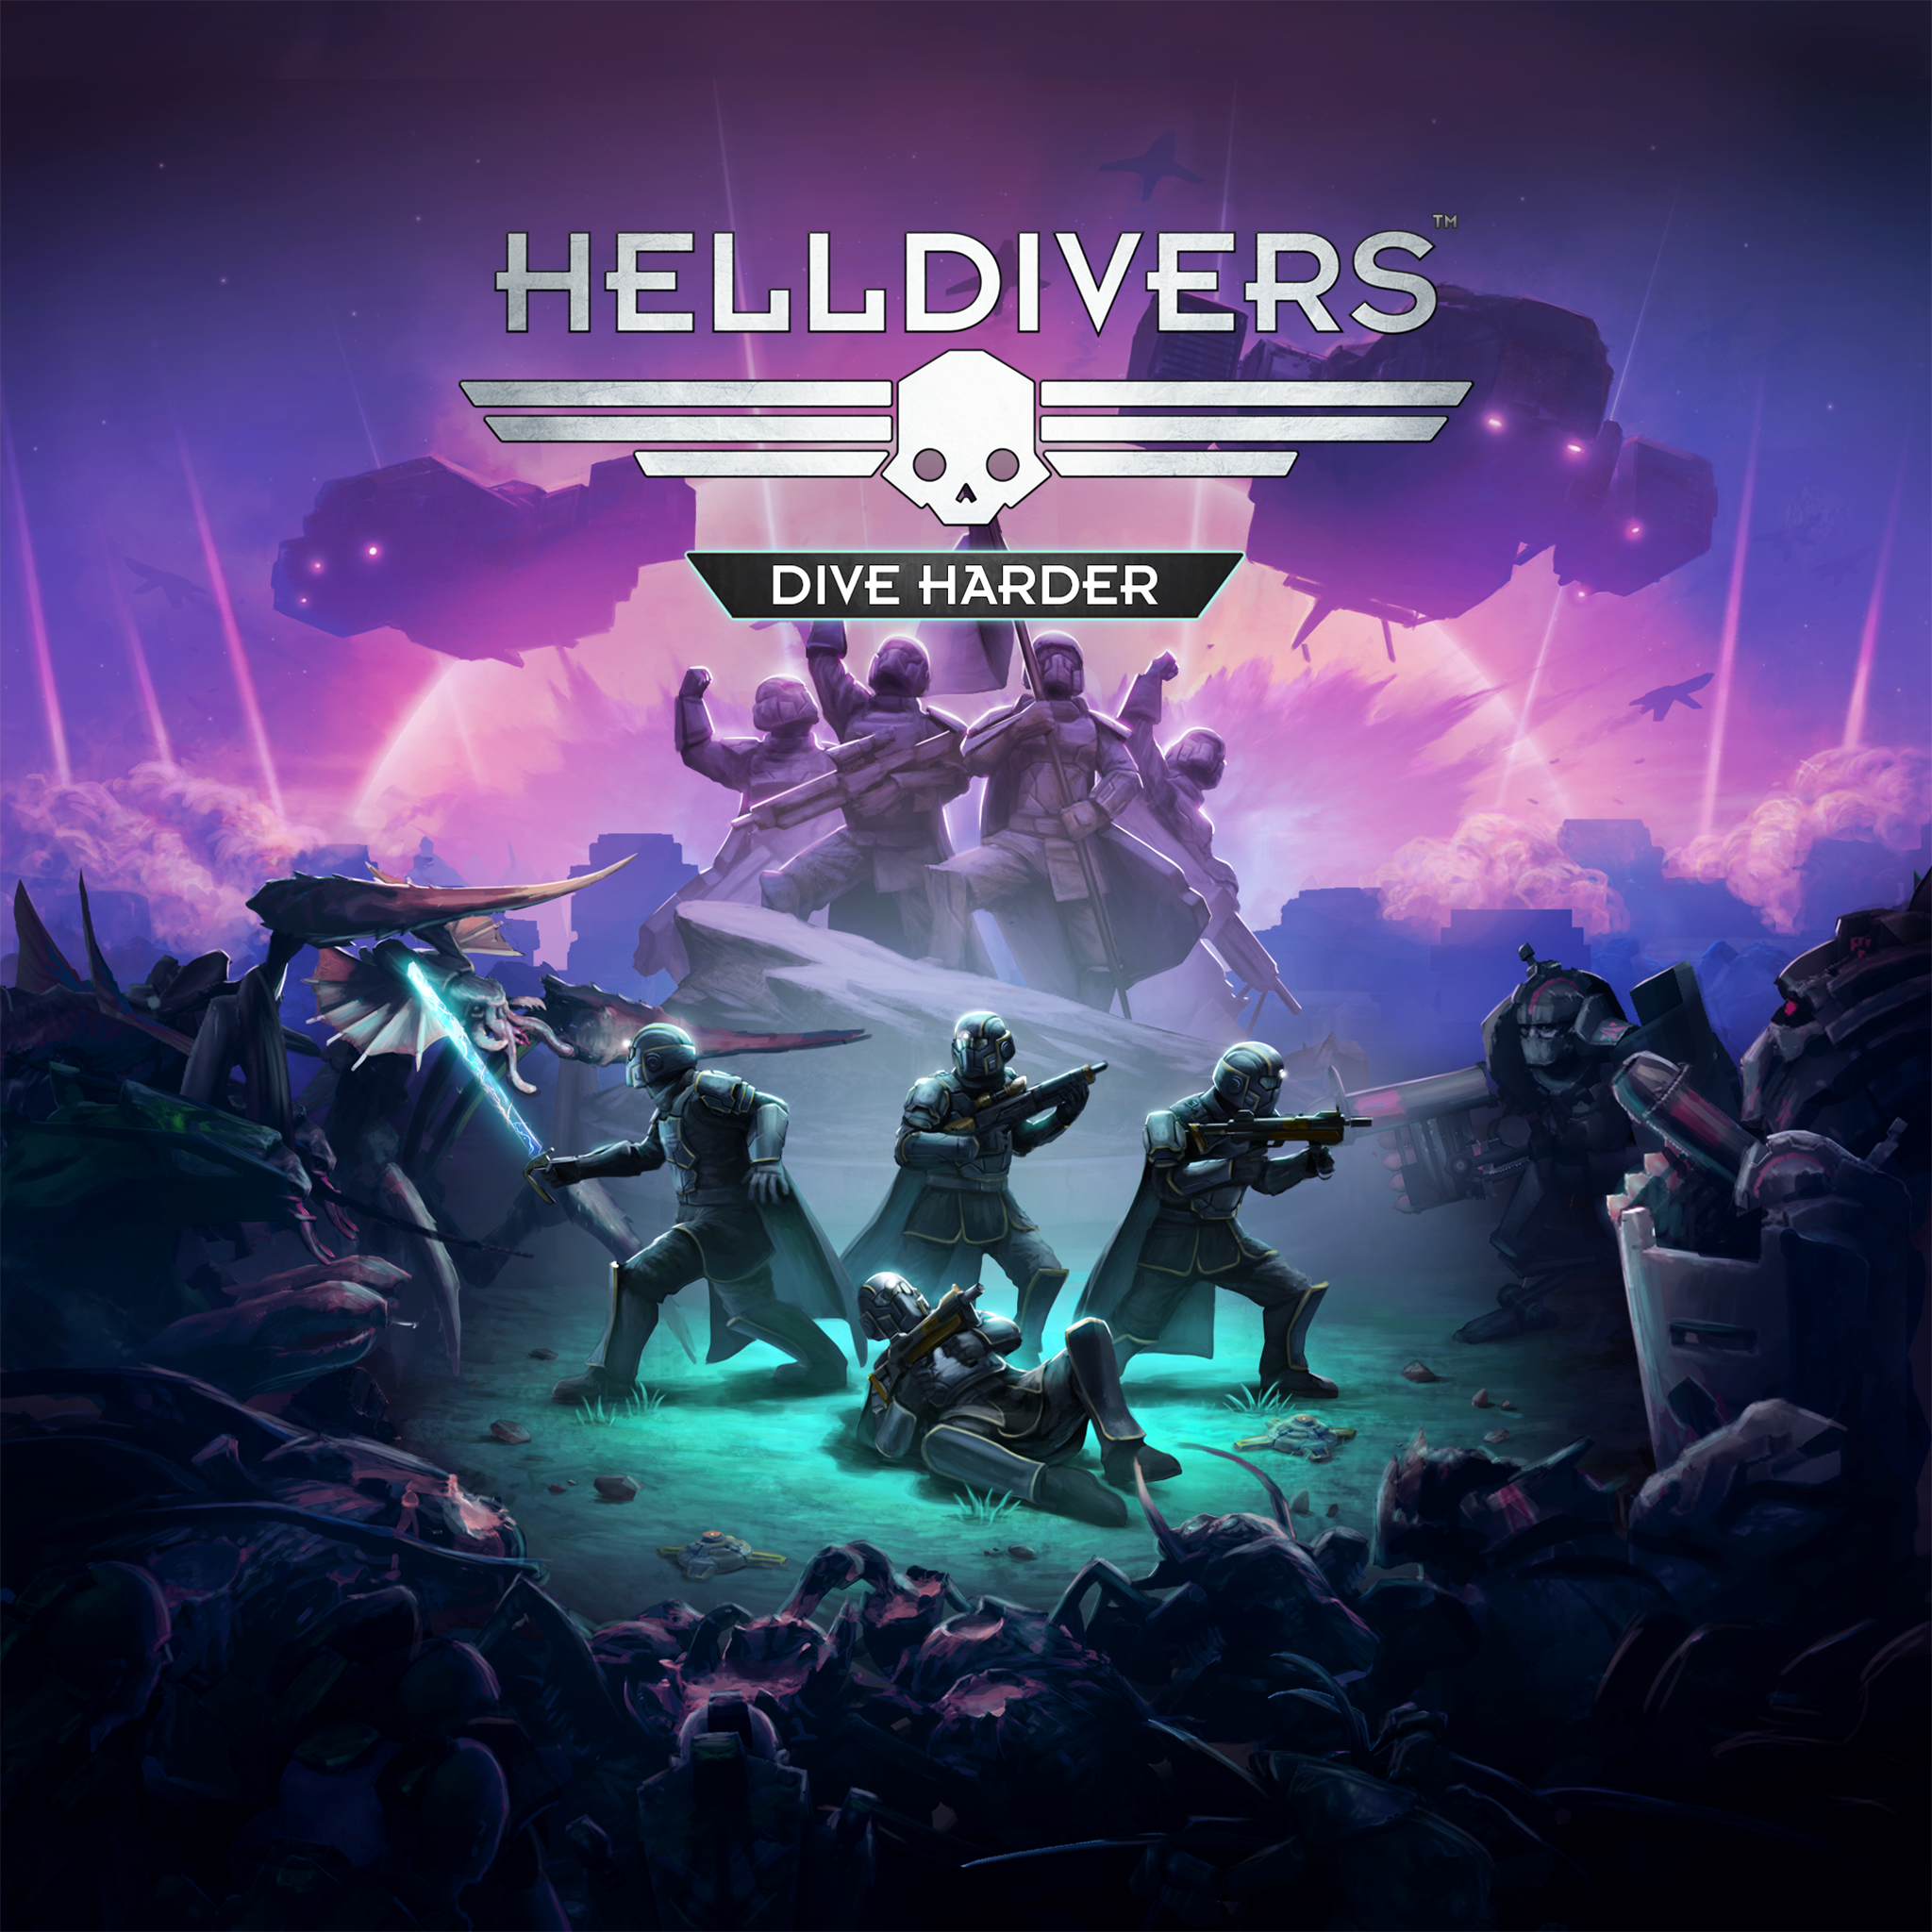 helldivers steam local coop crash when connecting player 2